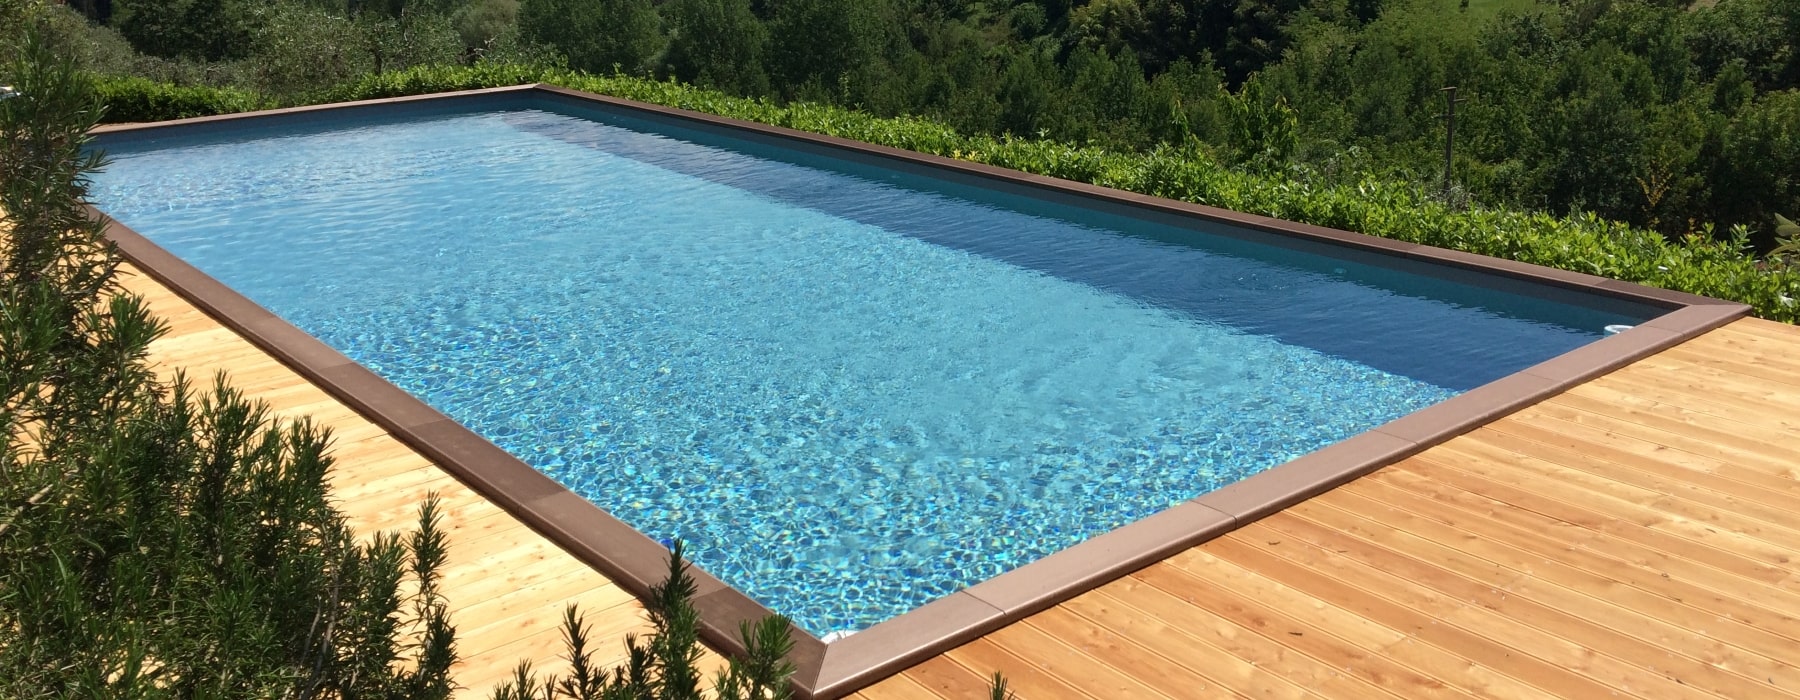 Above ground wooden pools